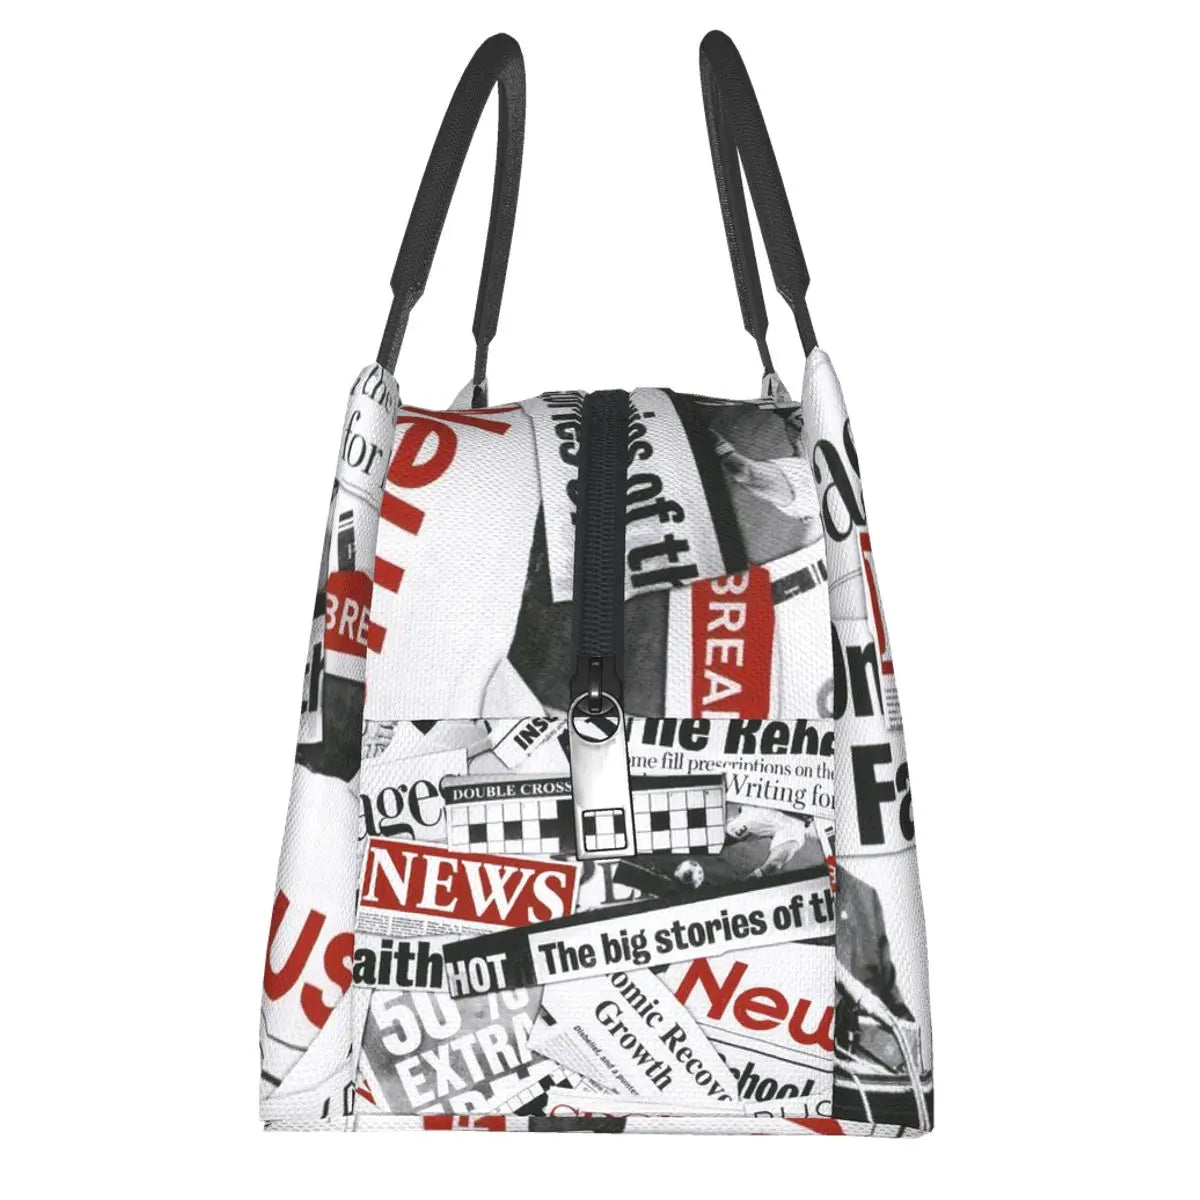 Portable Lunch Bag Newspaper Pattern Print Thermal Insulated Lunch Box Tote Cooler Handbag Bento Dinner Container School Storage